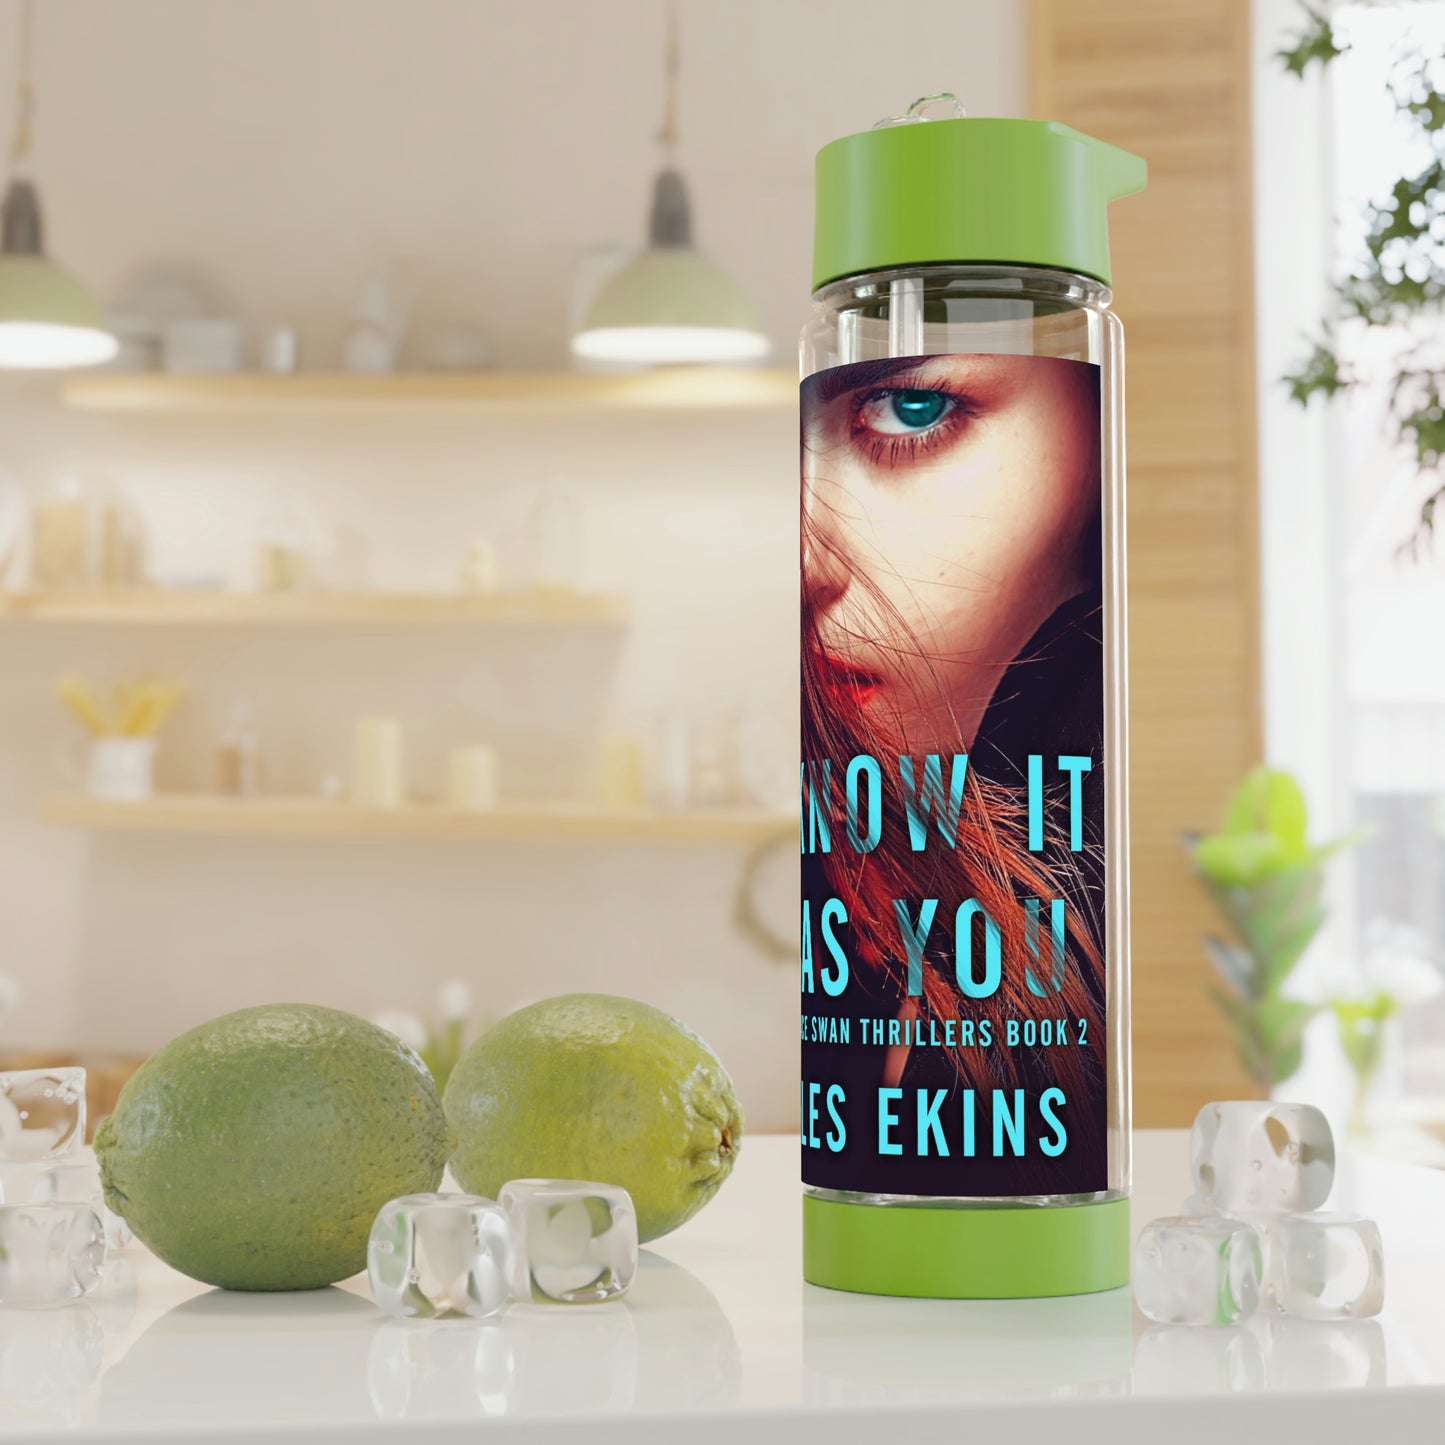 I Know It Was You - Infuser Water Bottle